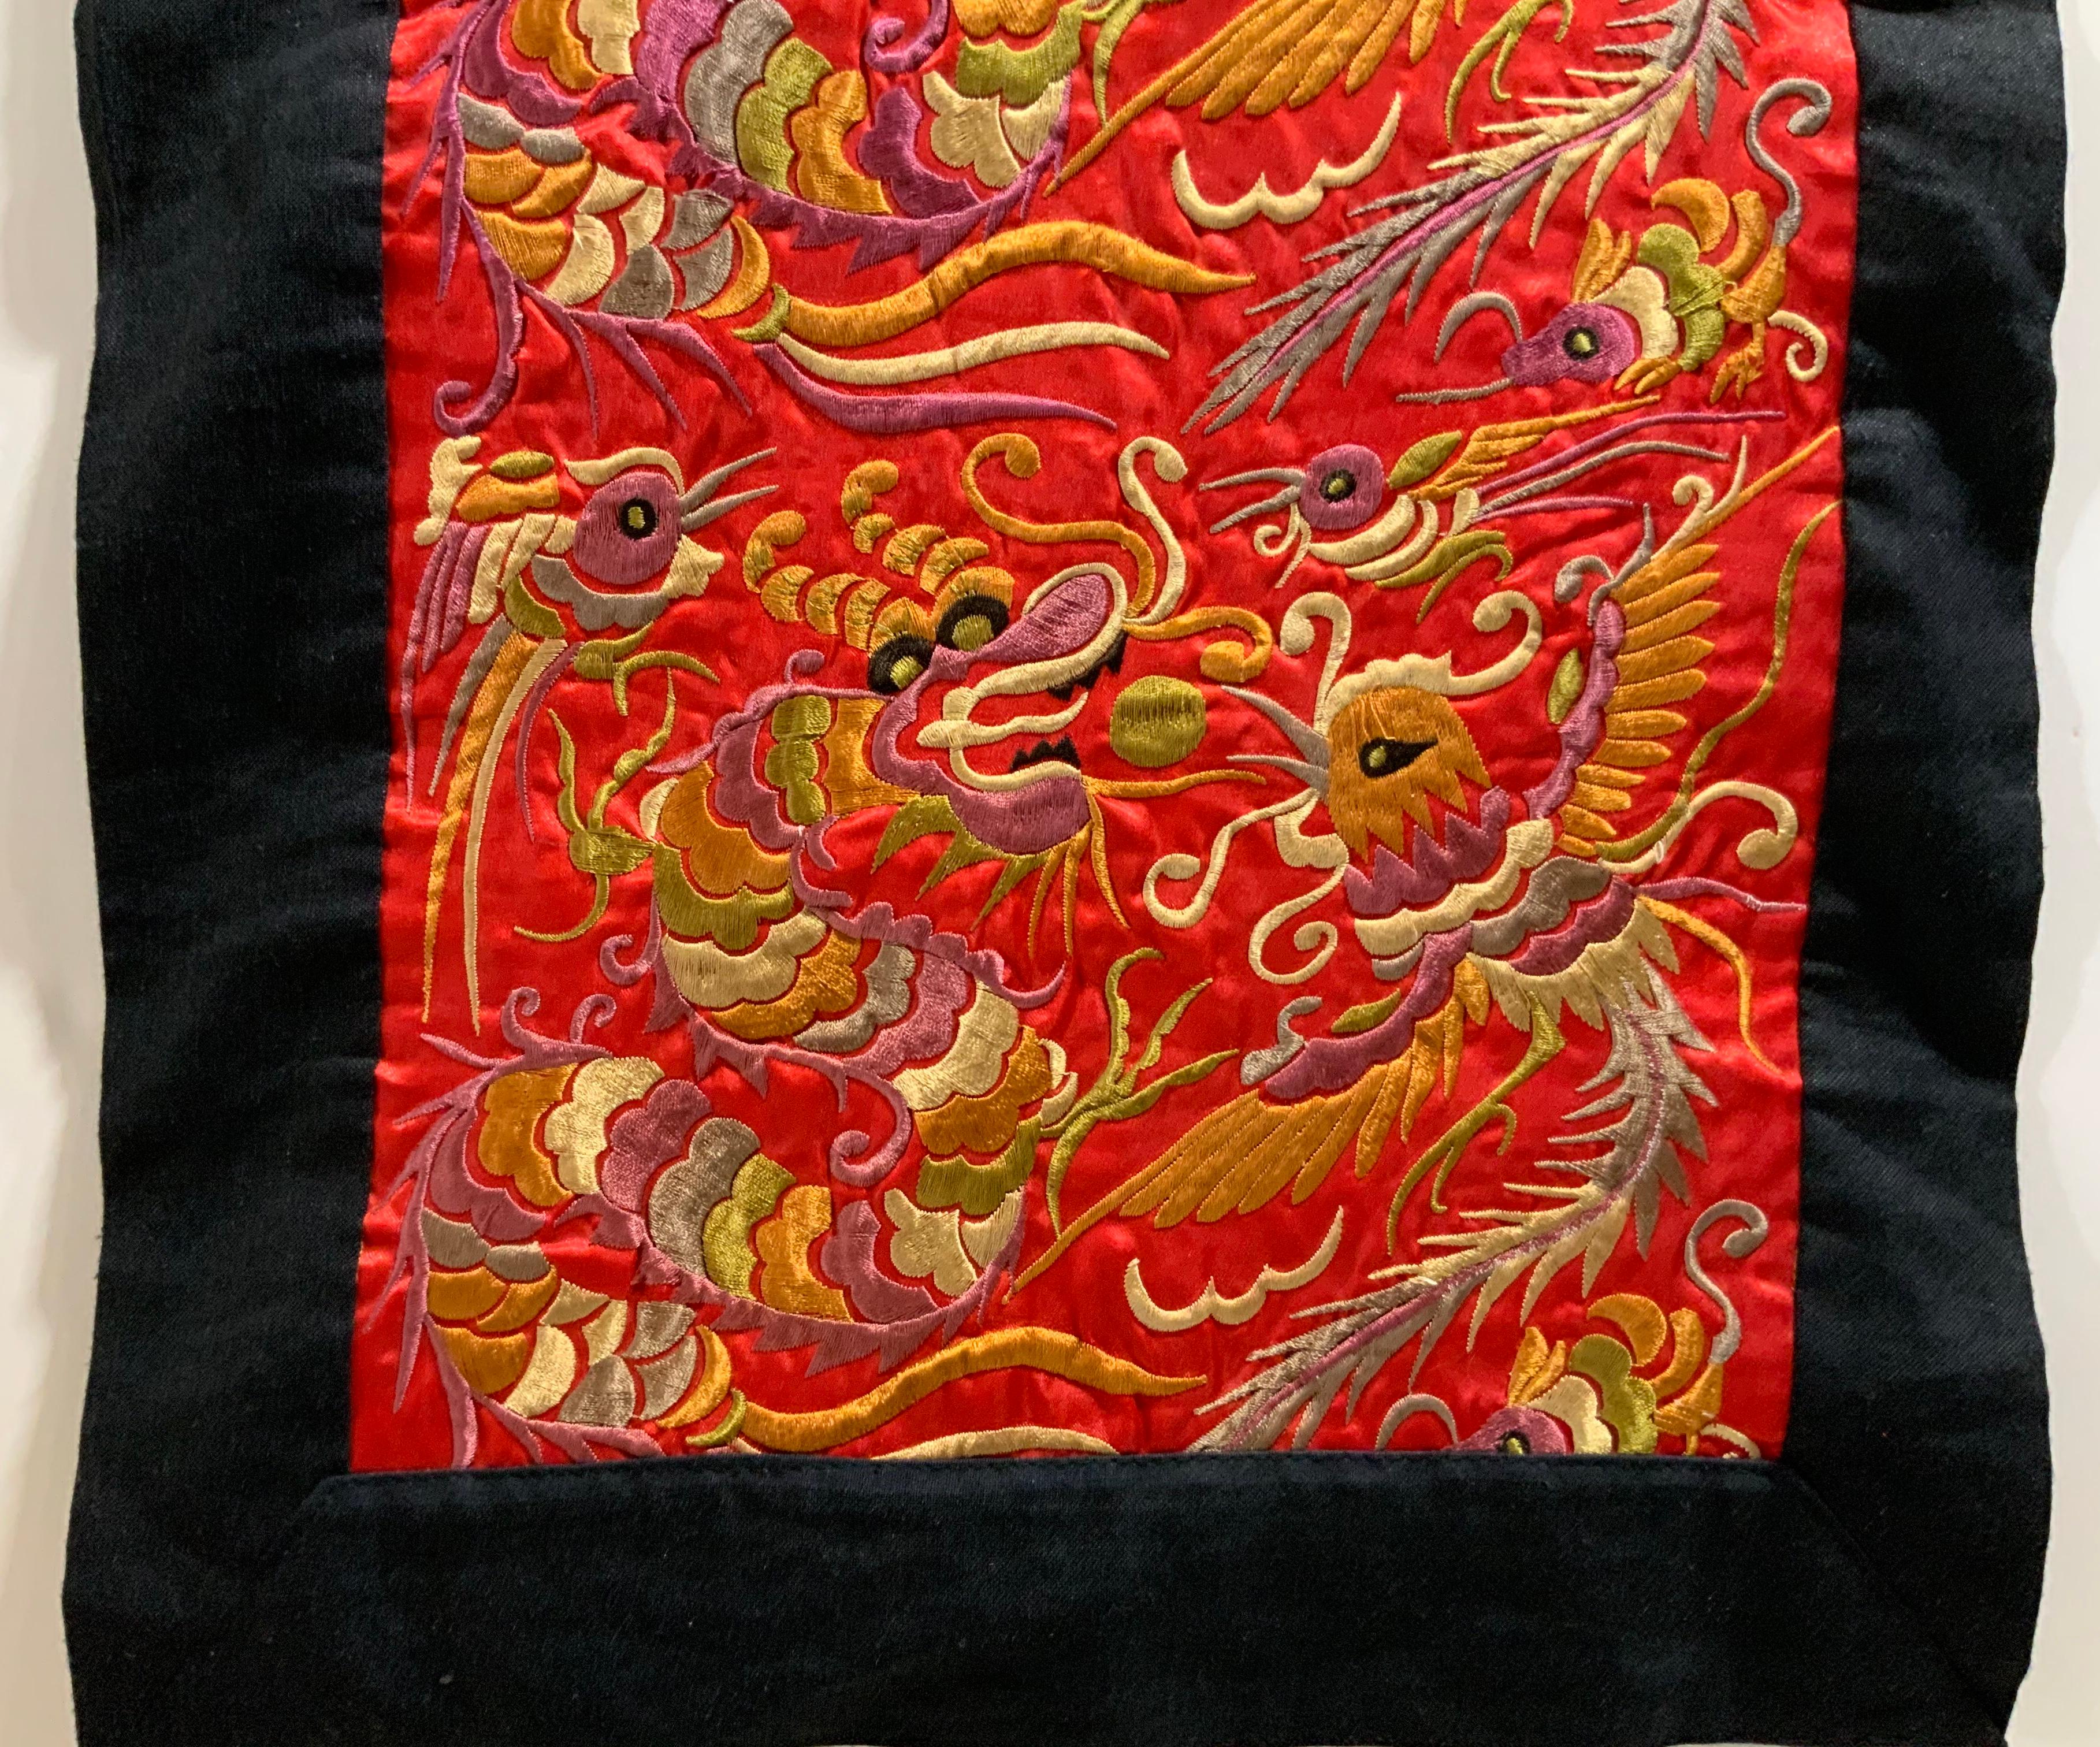 it is a large elaborately embroidered wall hanging made in kyrgyzstan and kazakhstan